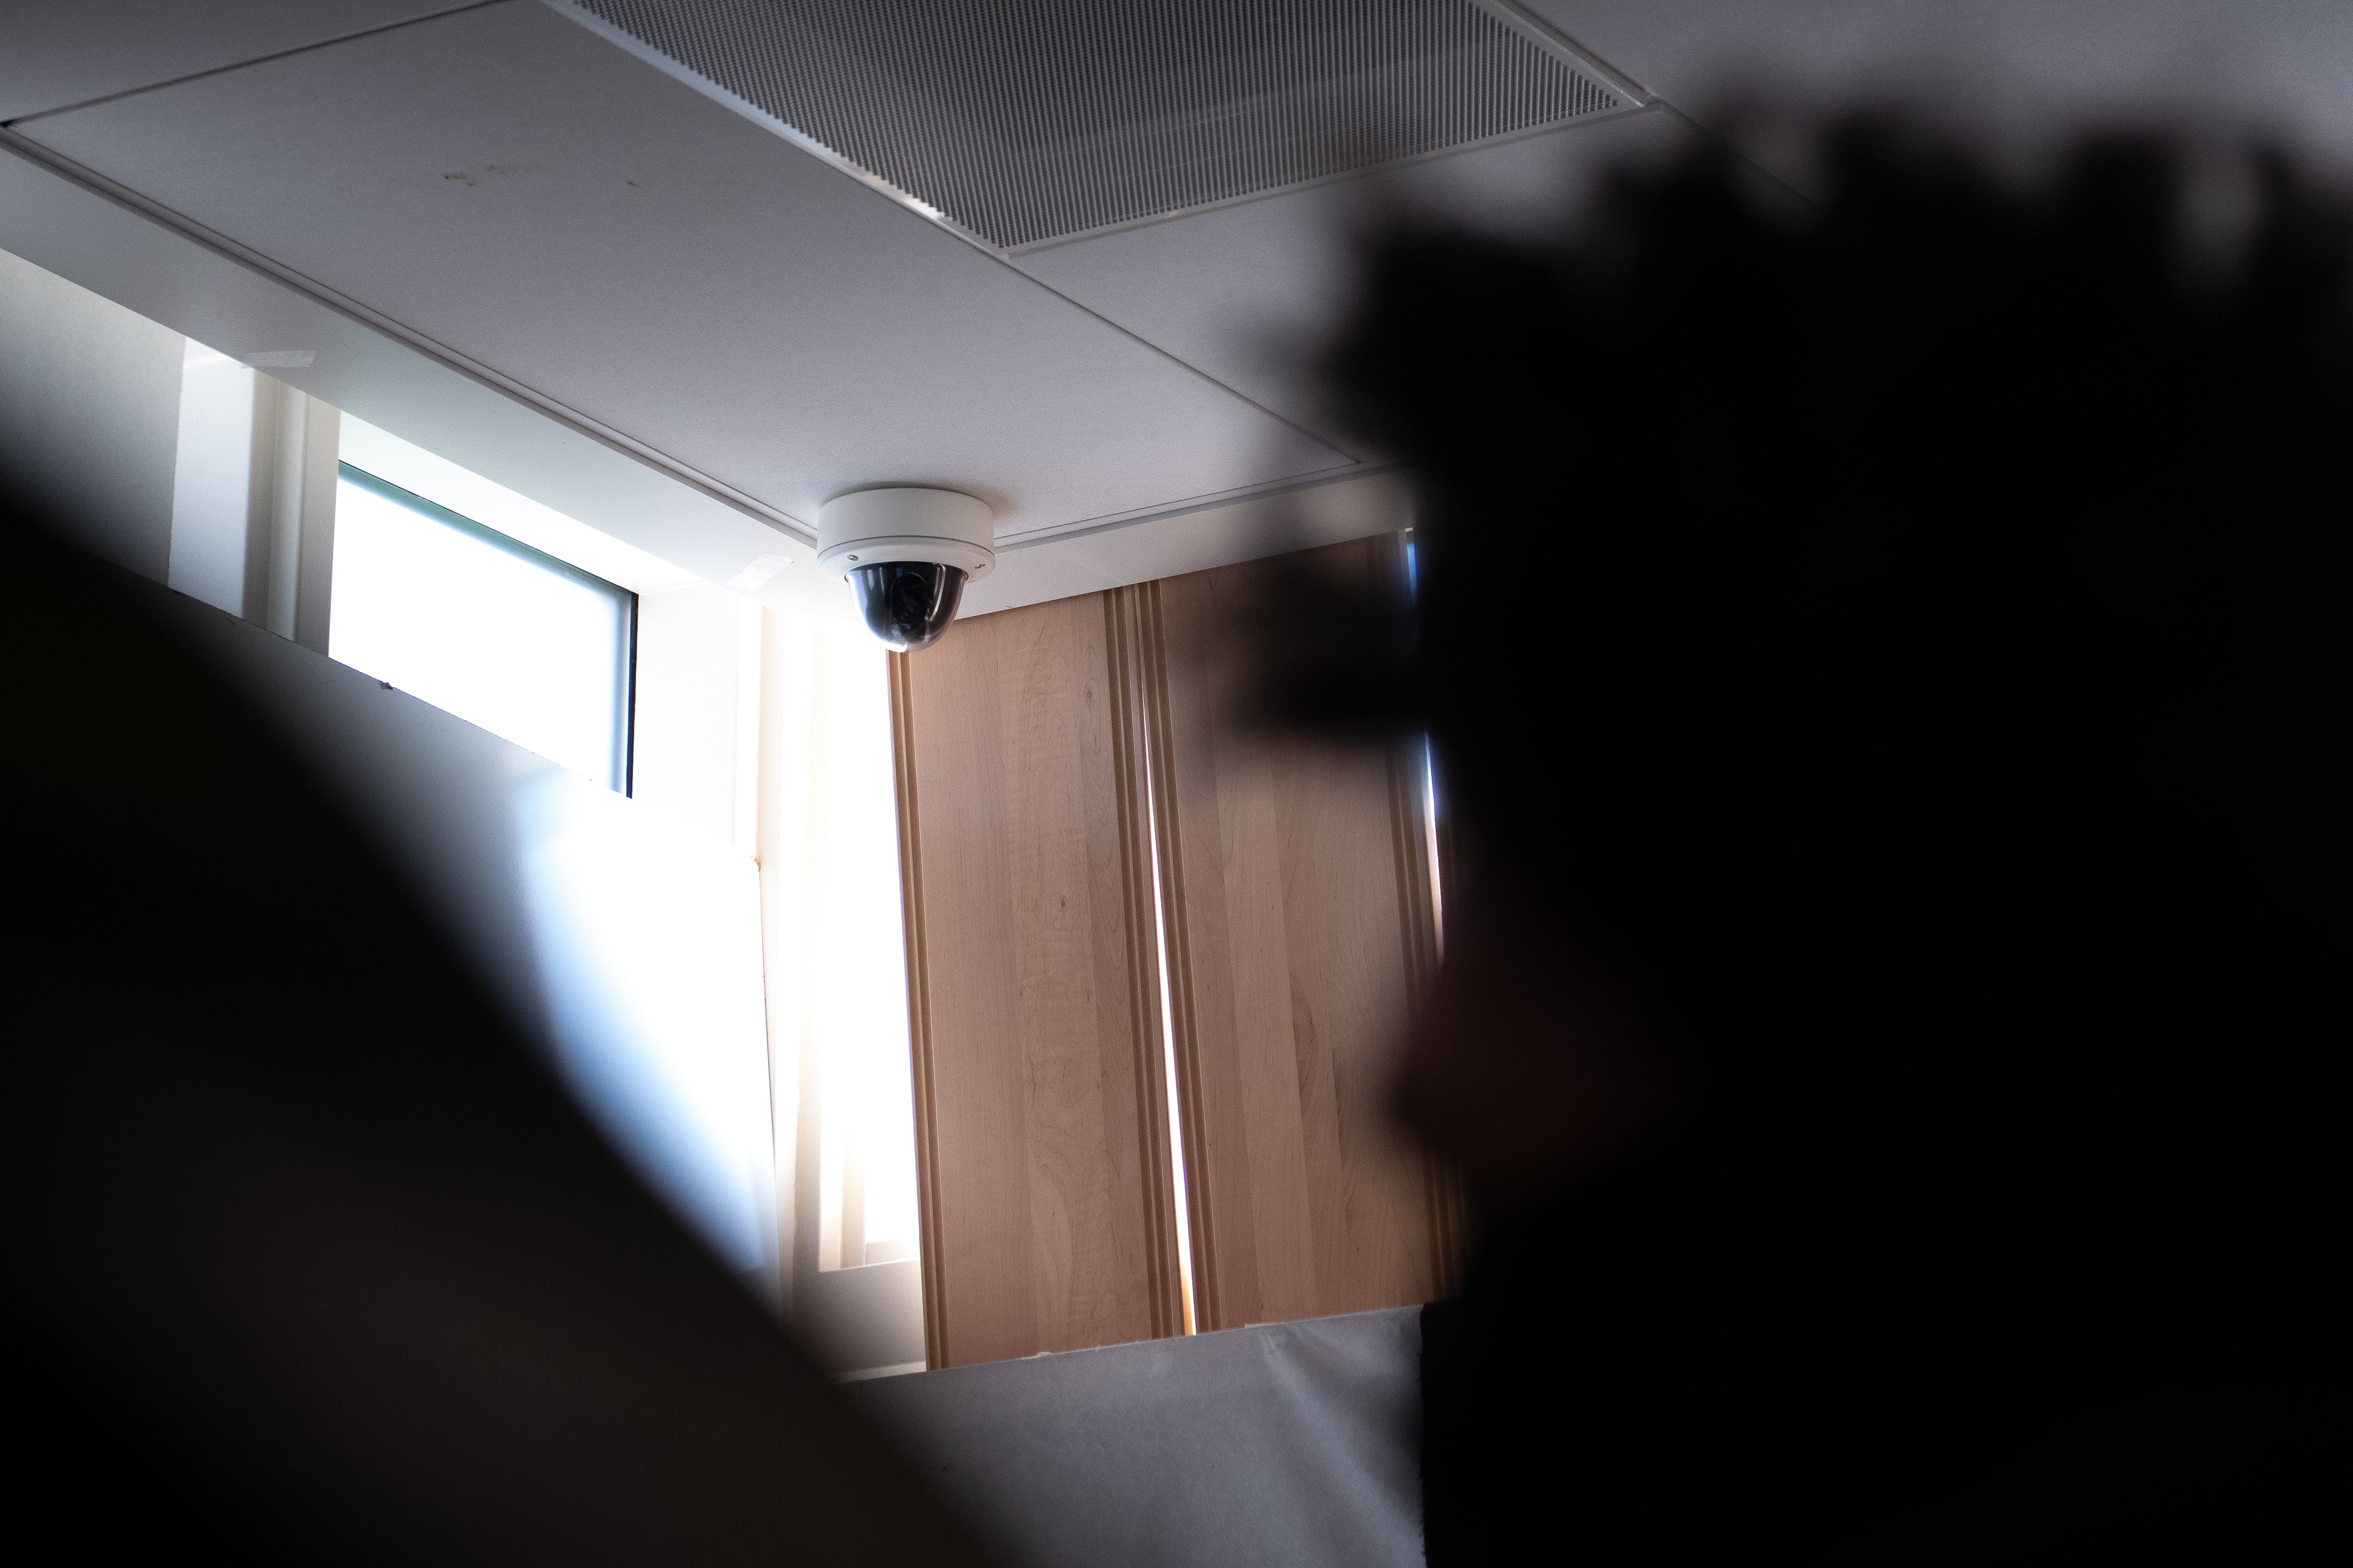 A security camera hangs in the corner of a room, as the silhouette of a student sits in the foreground.